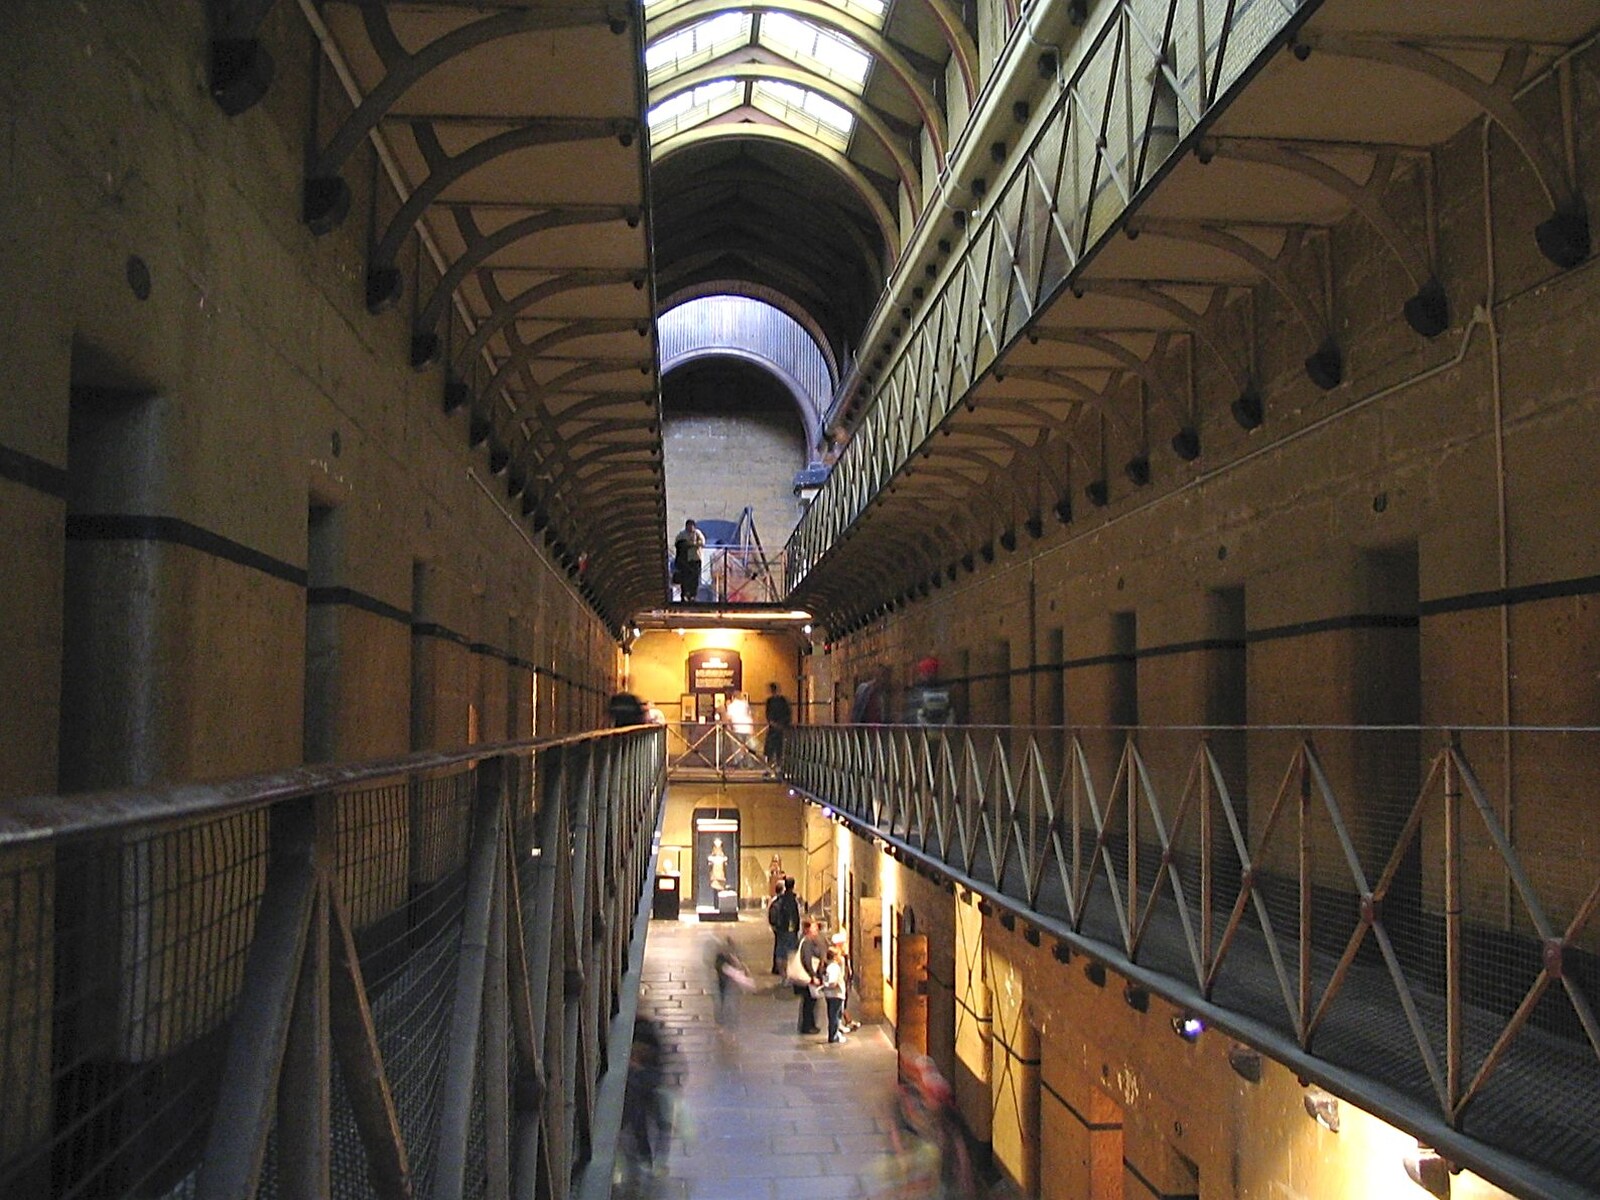 The remaining cell block from A Couple of Days in Melbourne, Victoria, Australia - 5th October 2004